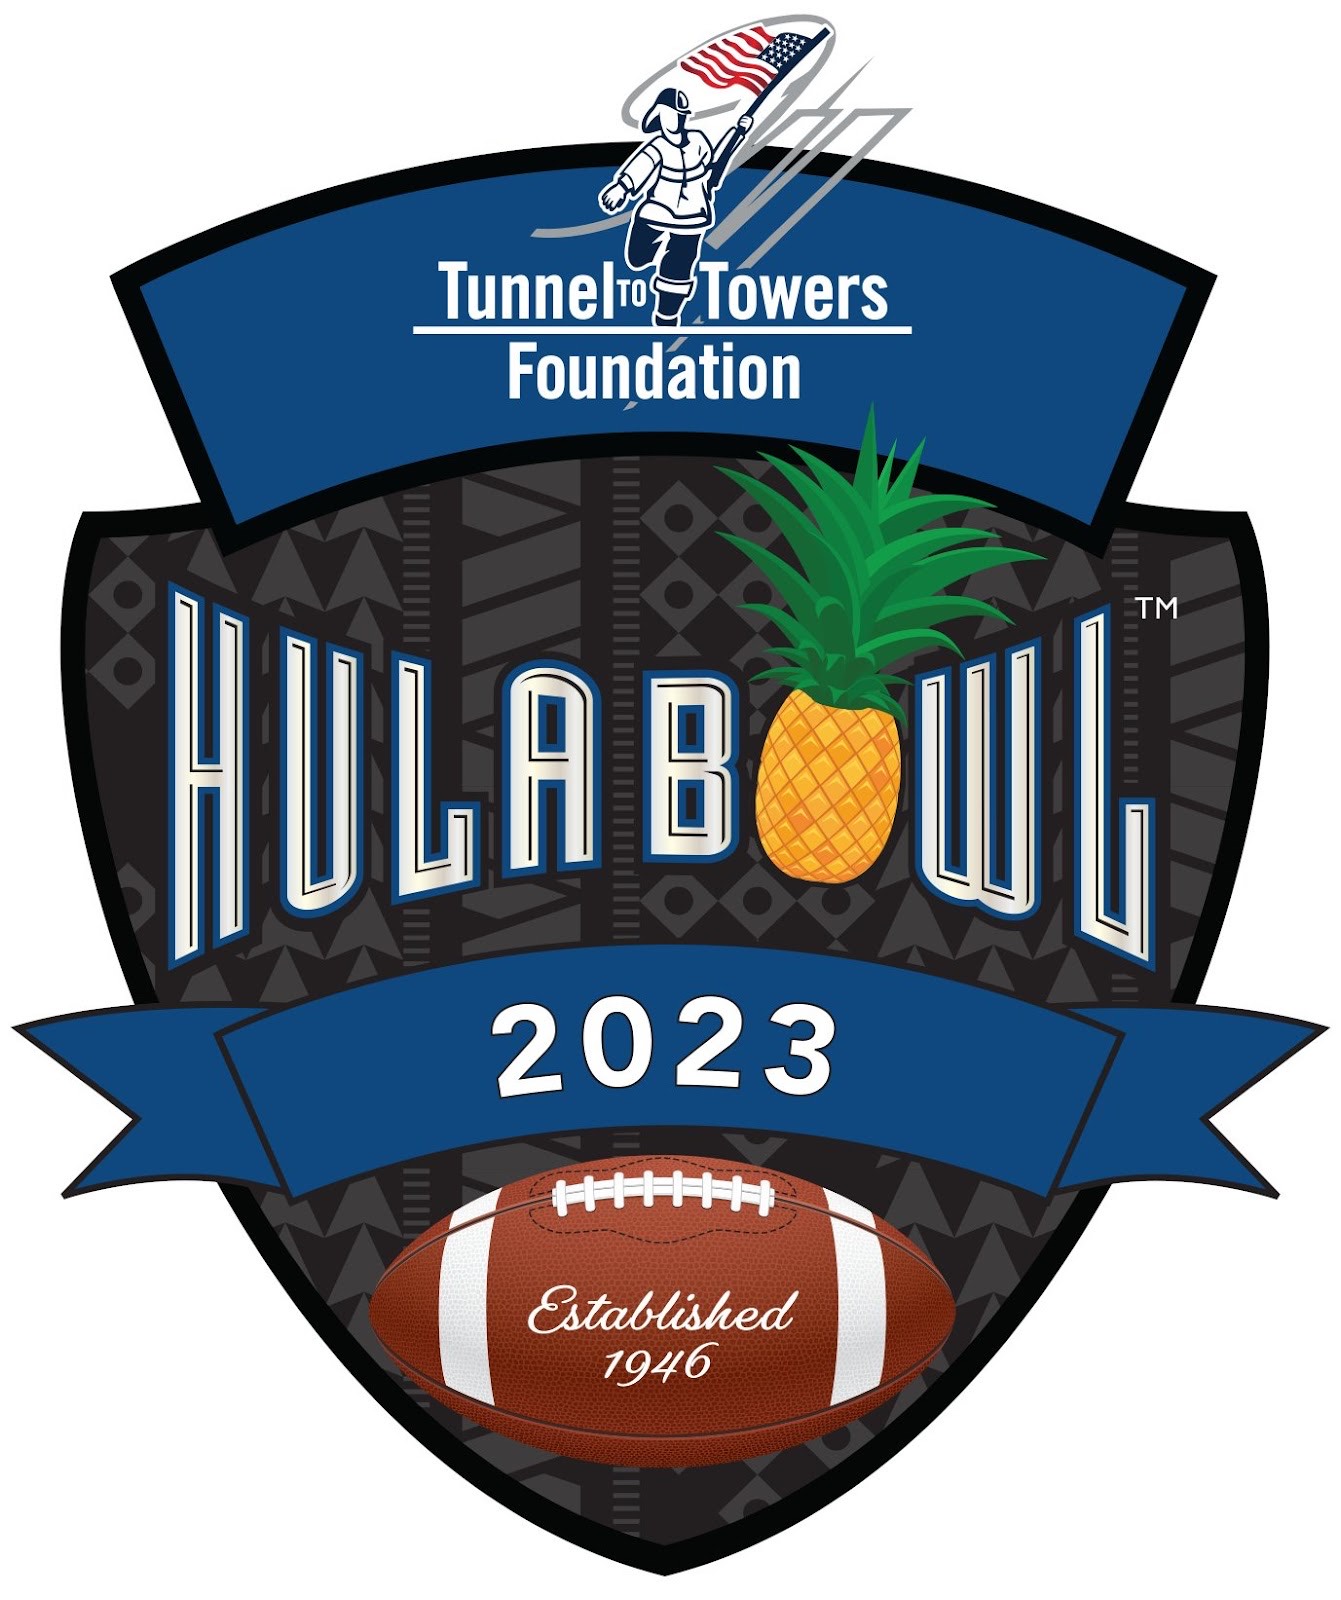 Hula Bowl NFL Importance: What is the purpose of the Hula Bowl?